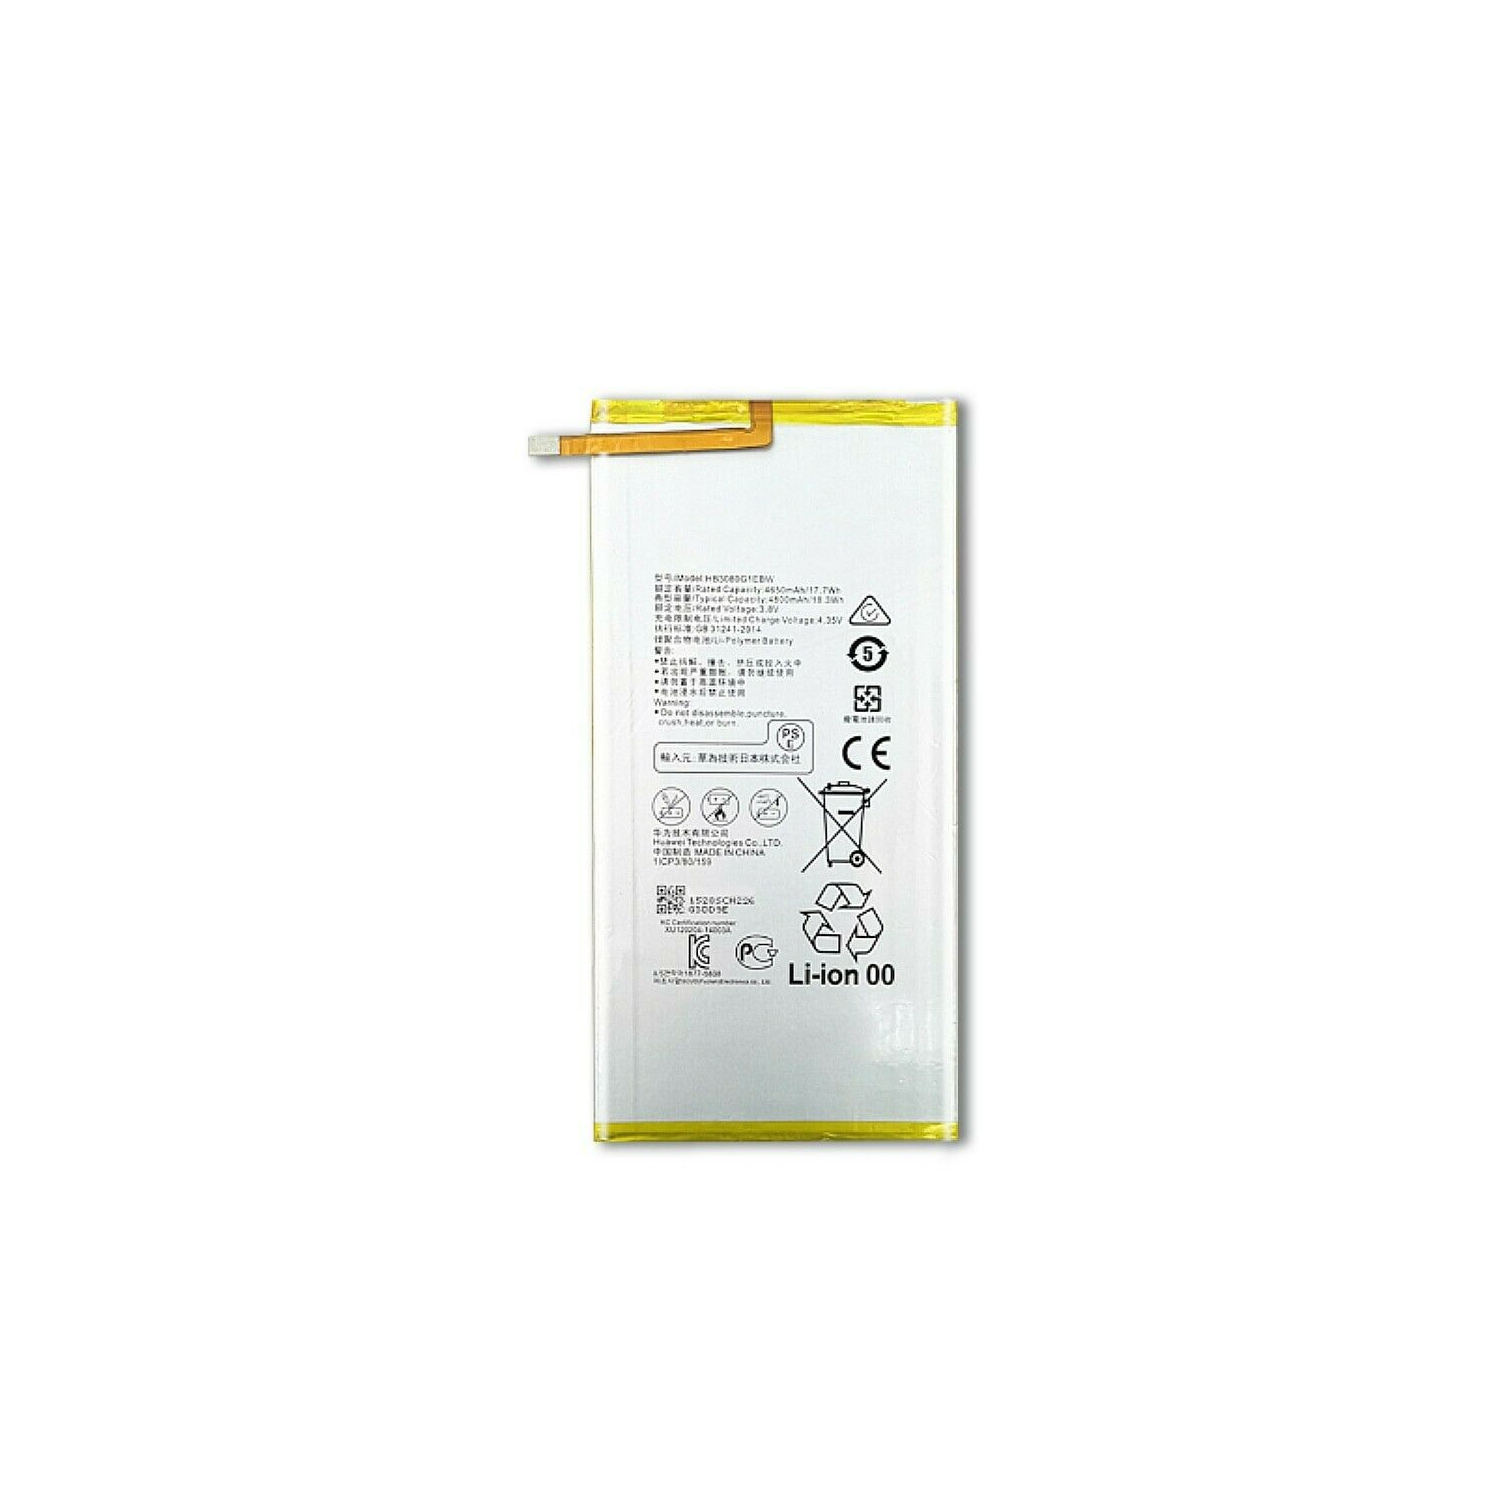 Replacement Battery for Huawei MediaPad T3 9.6" / M1 M2 8.0", HB3080G1EBW